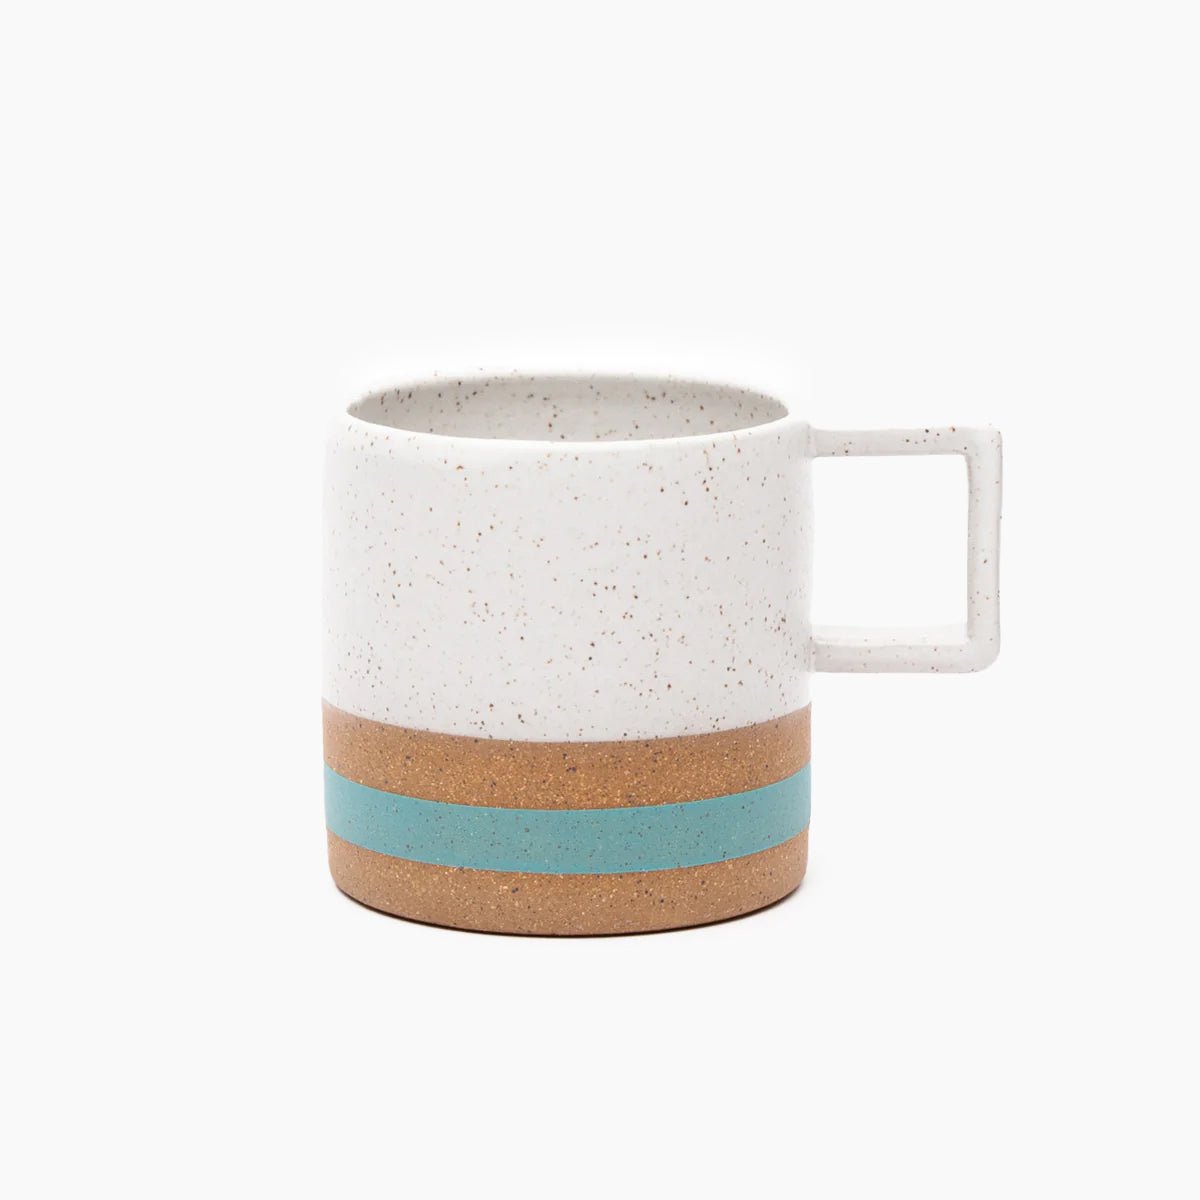 Handle Mug with white satin glaze and turquoise stripe. Made in Portland, Oregon by Wolf Ceramics.